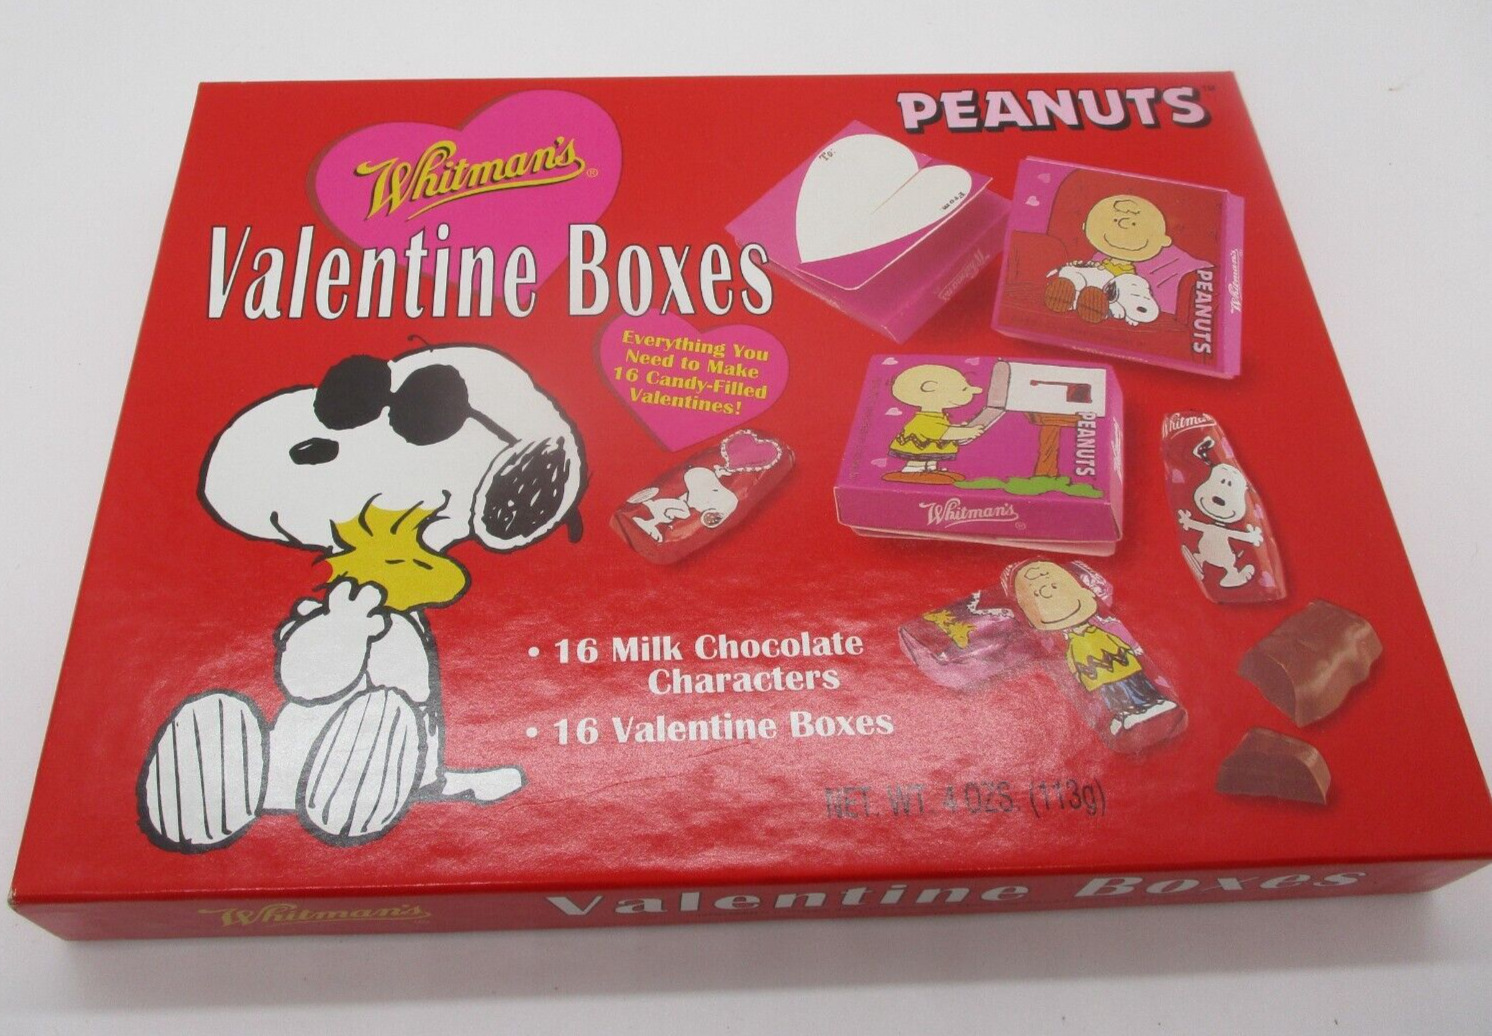 Peanuts Whitman’s Valentine Boxes  - All Boxes No Candy